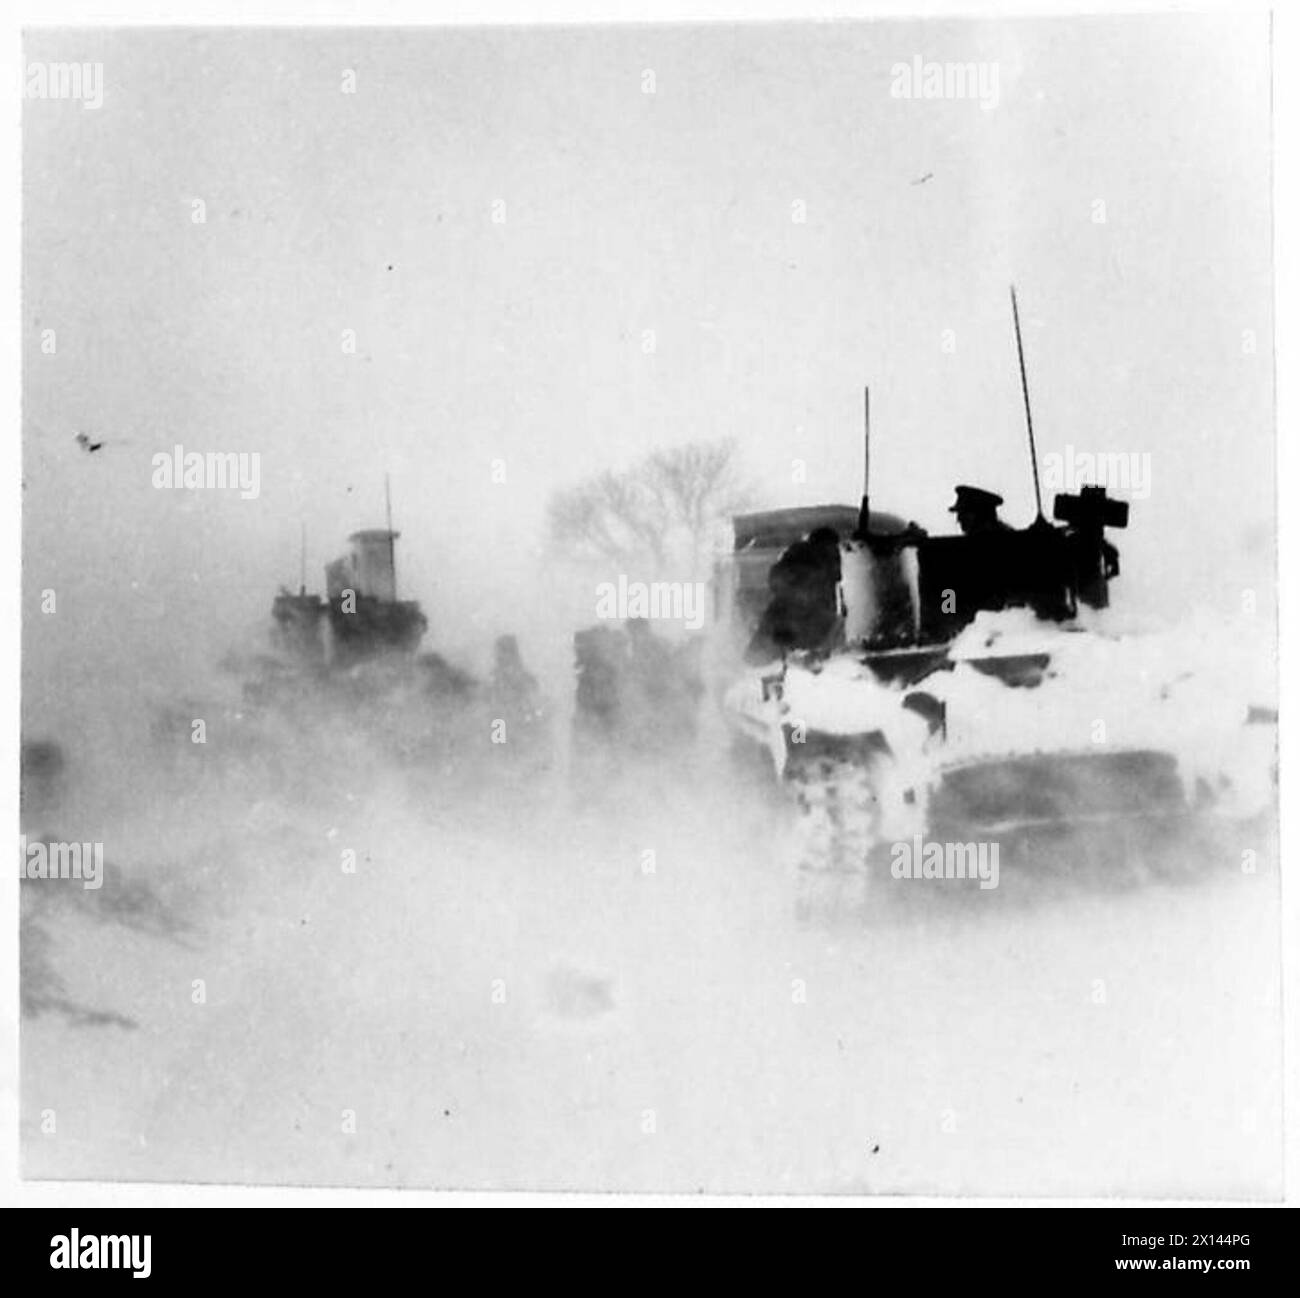 TANKS EXTRICATE MOTOR COACH FROM SNOWDRIFT - Tanka extricating the motor coach during a blizzard British Army Stock Photo